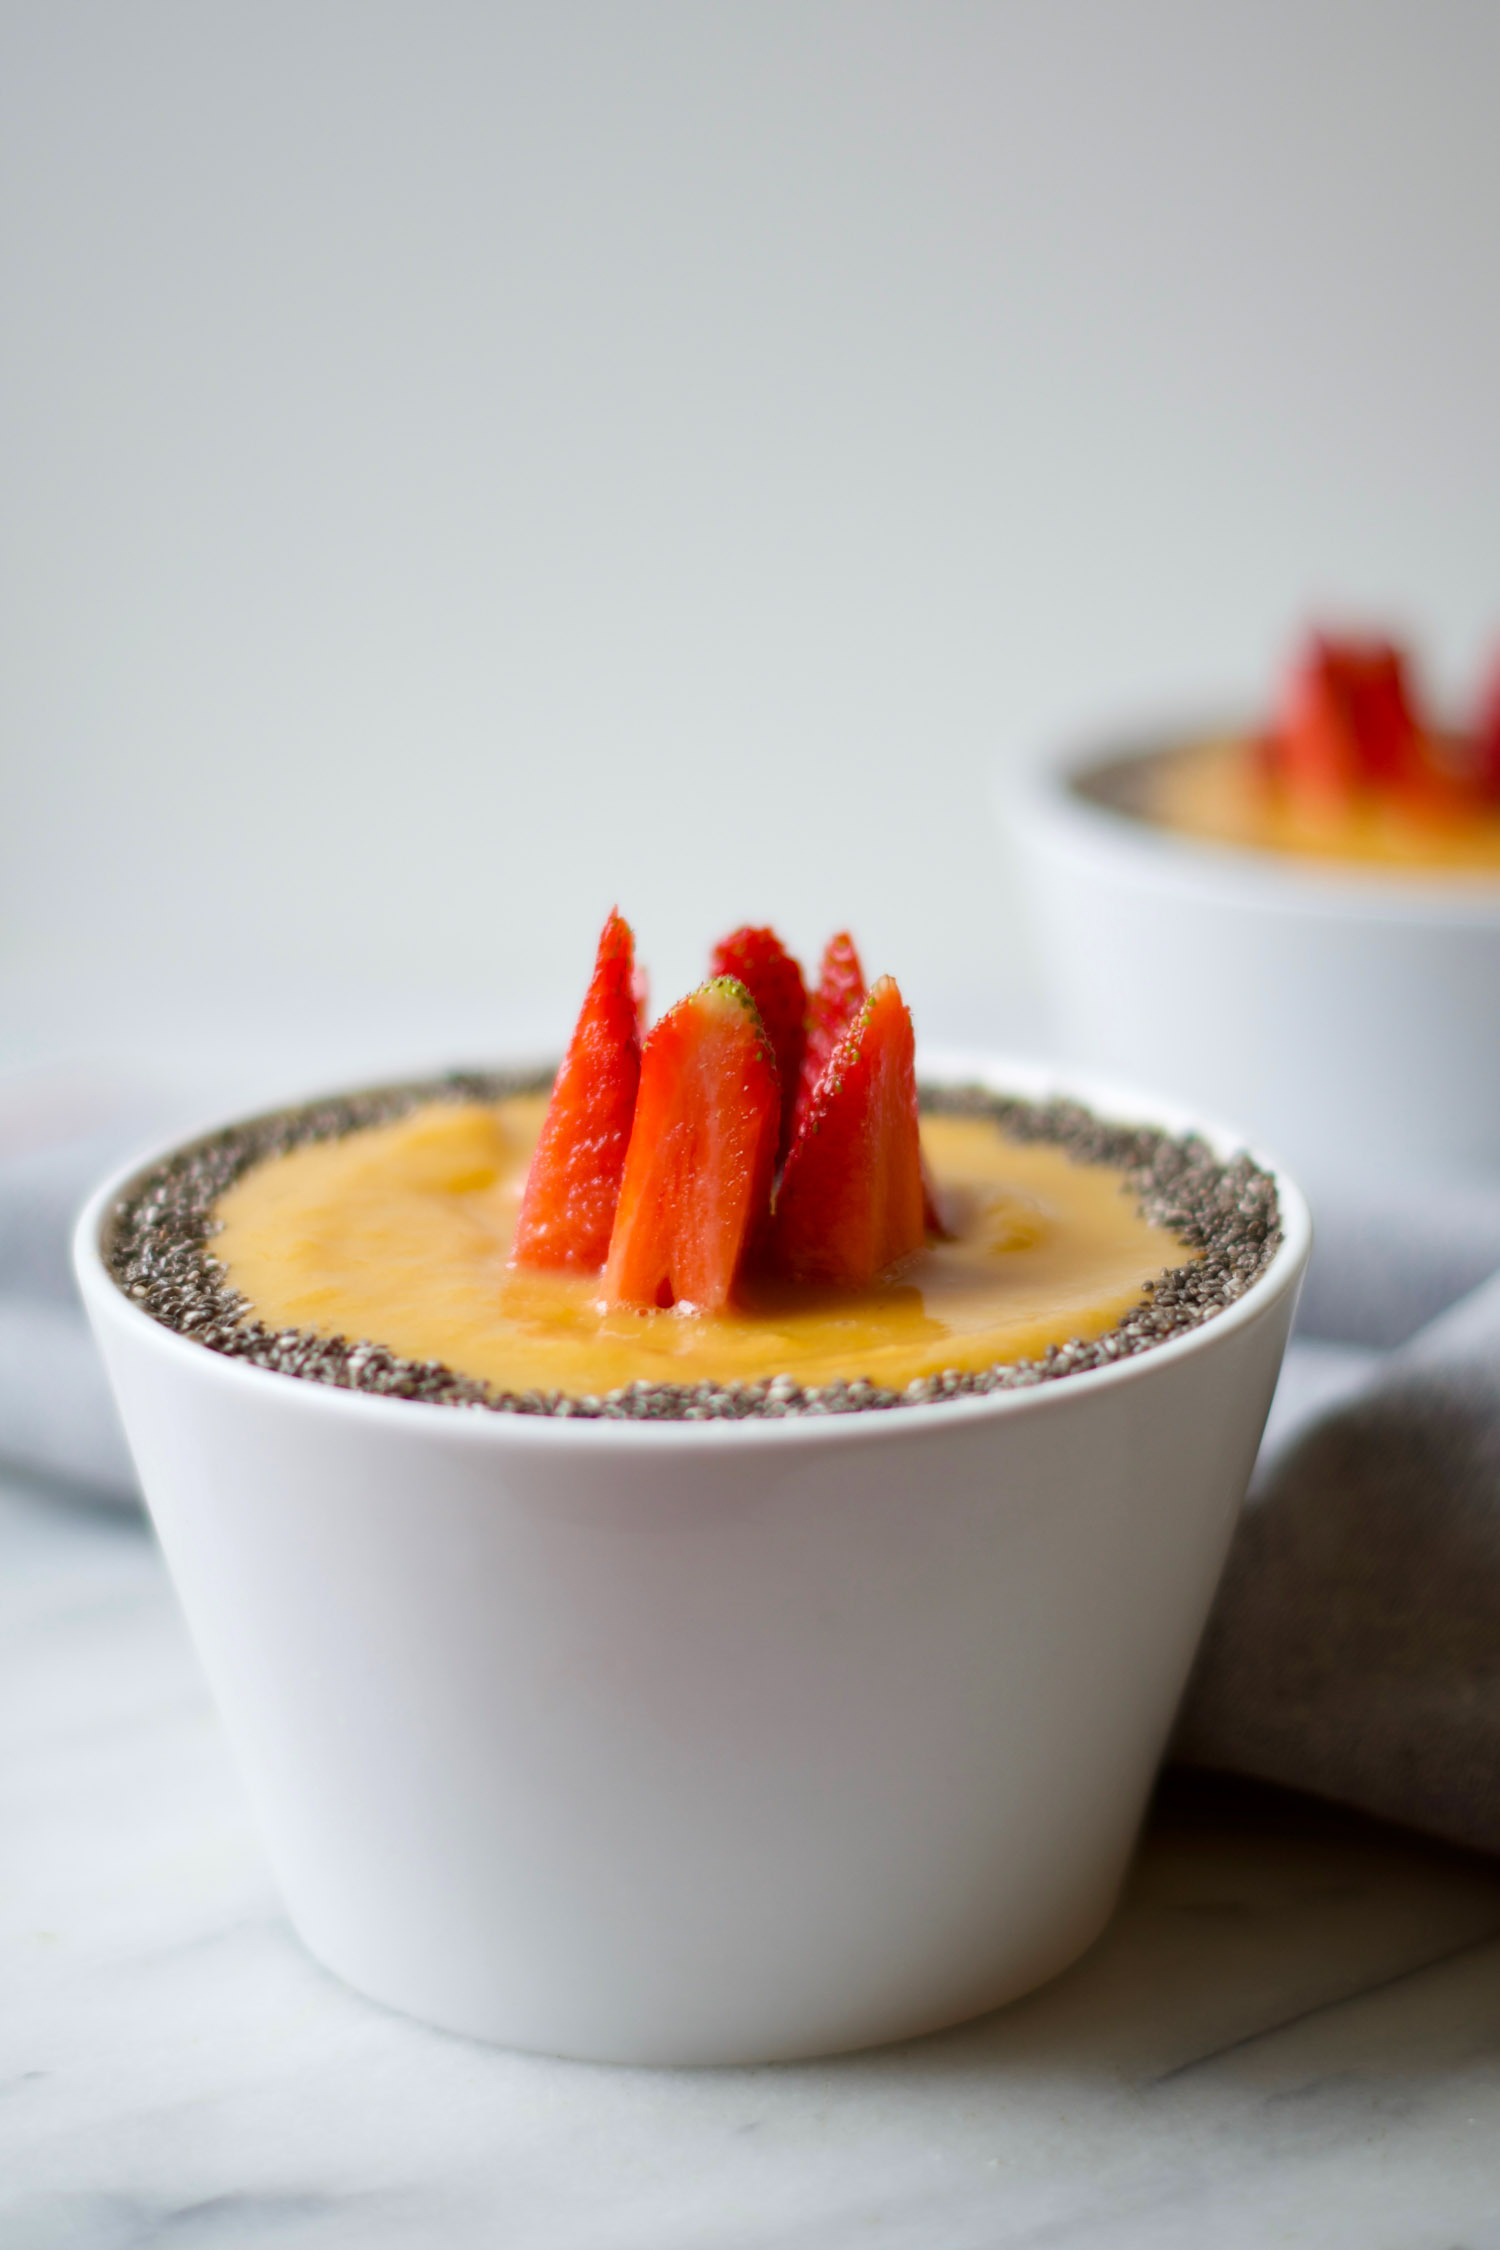 SUNNY SMOOTHIE BOWL WITH WHOLE PLANT-BASED INGREDIENTS, BY BEAUTIFUL INGREDIENT